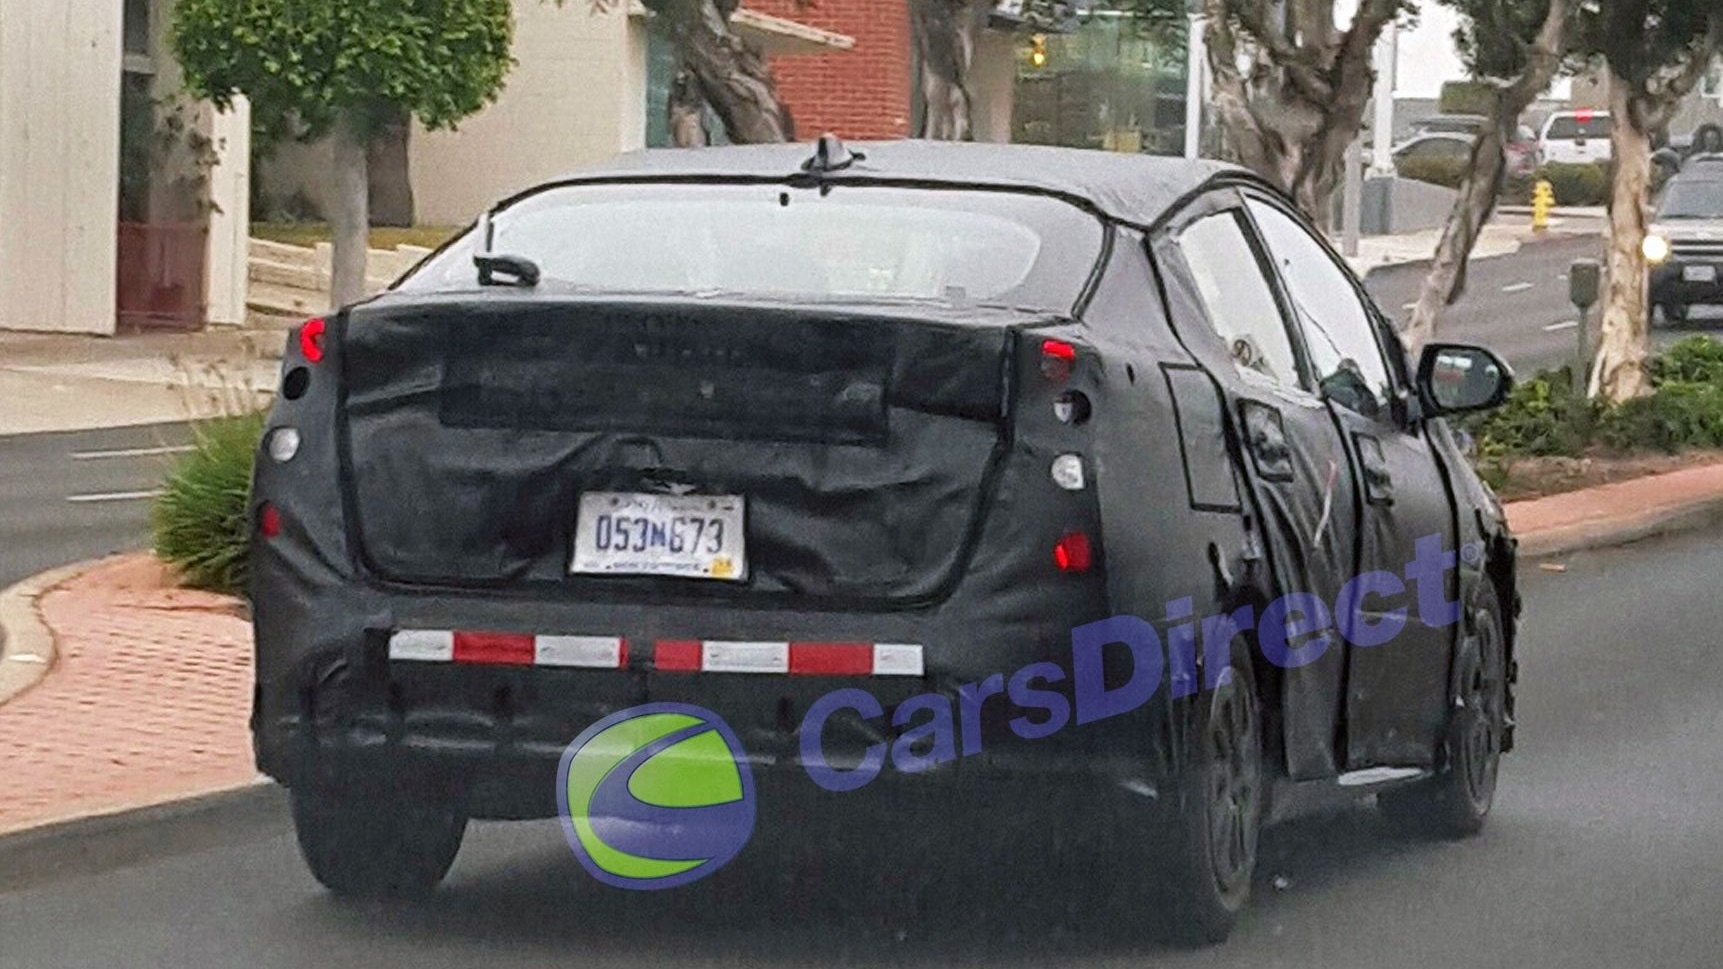 2016 Toyota Prius camouflaged test car, Southern California, Jun 2015  [photo by CarsDirect]